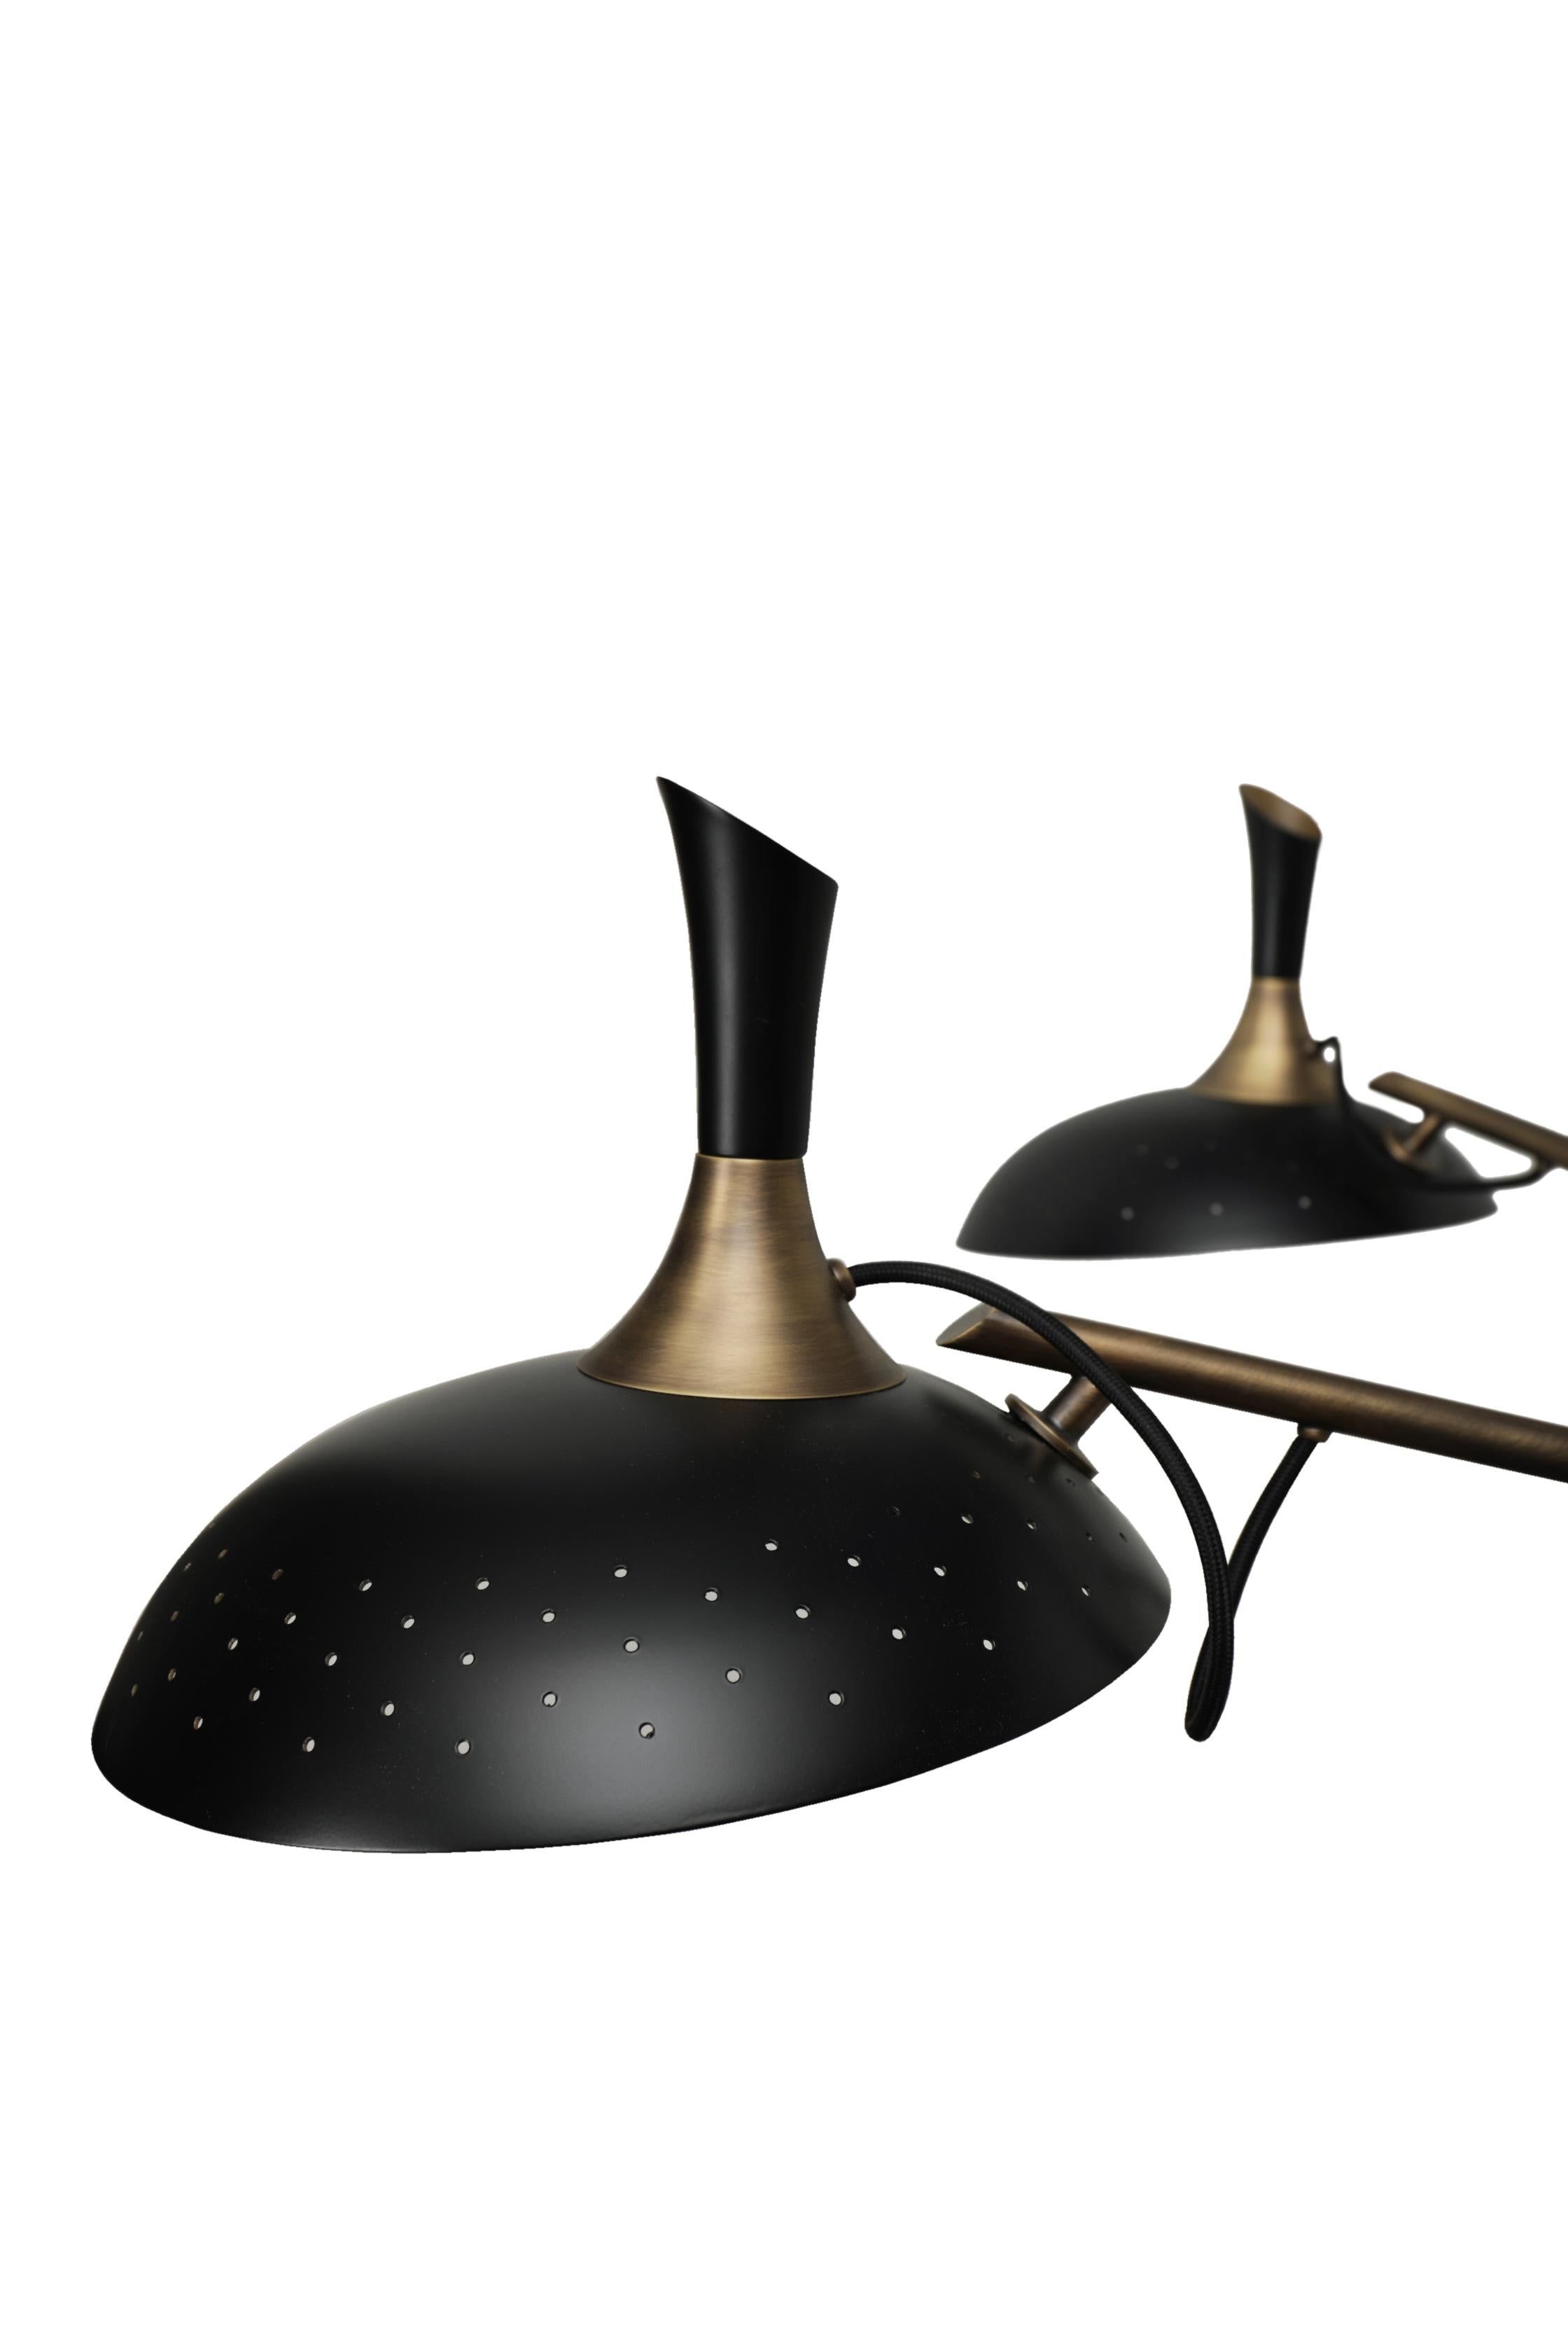 Inspired by the enigmatic life of Abbey Lincoln, this majestic pendant light will be the right lighting design choice for a dramatic dining room. A memorable piece that counts with golden finishes and black matte to give it a twist. This luxurious